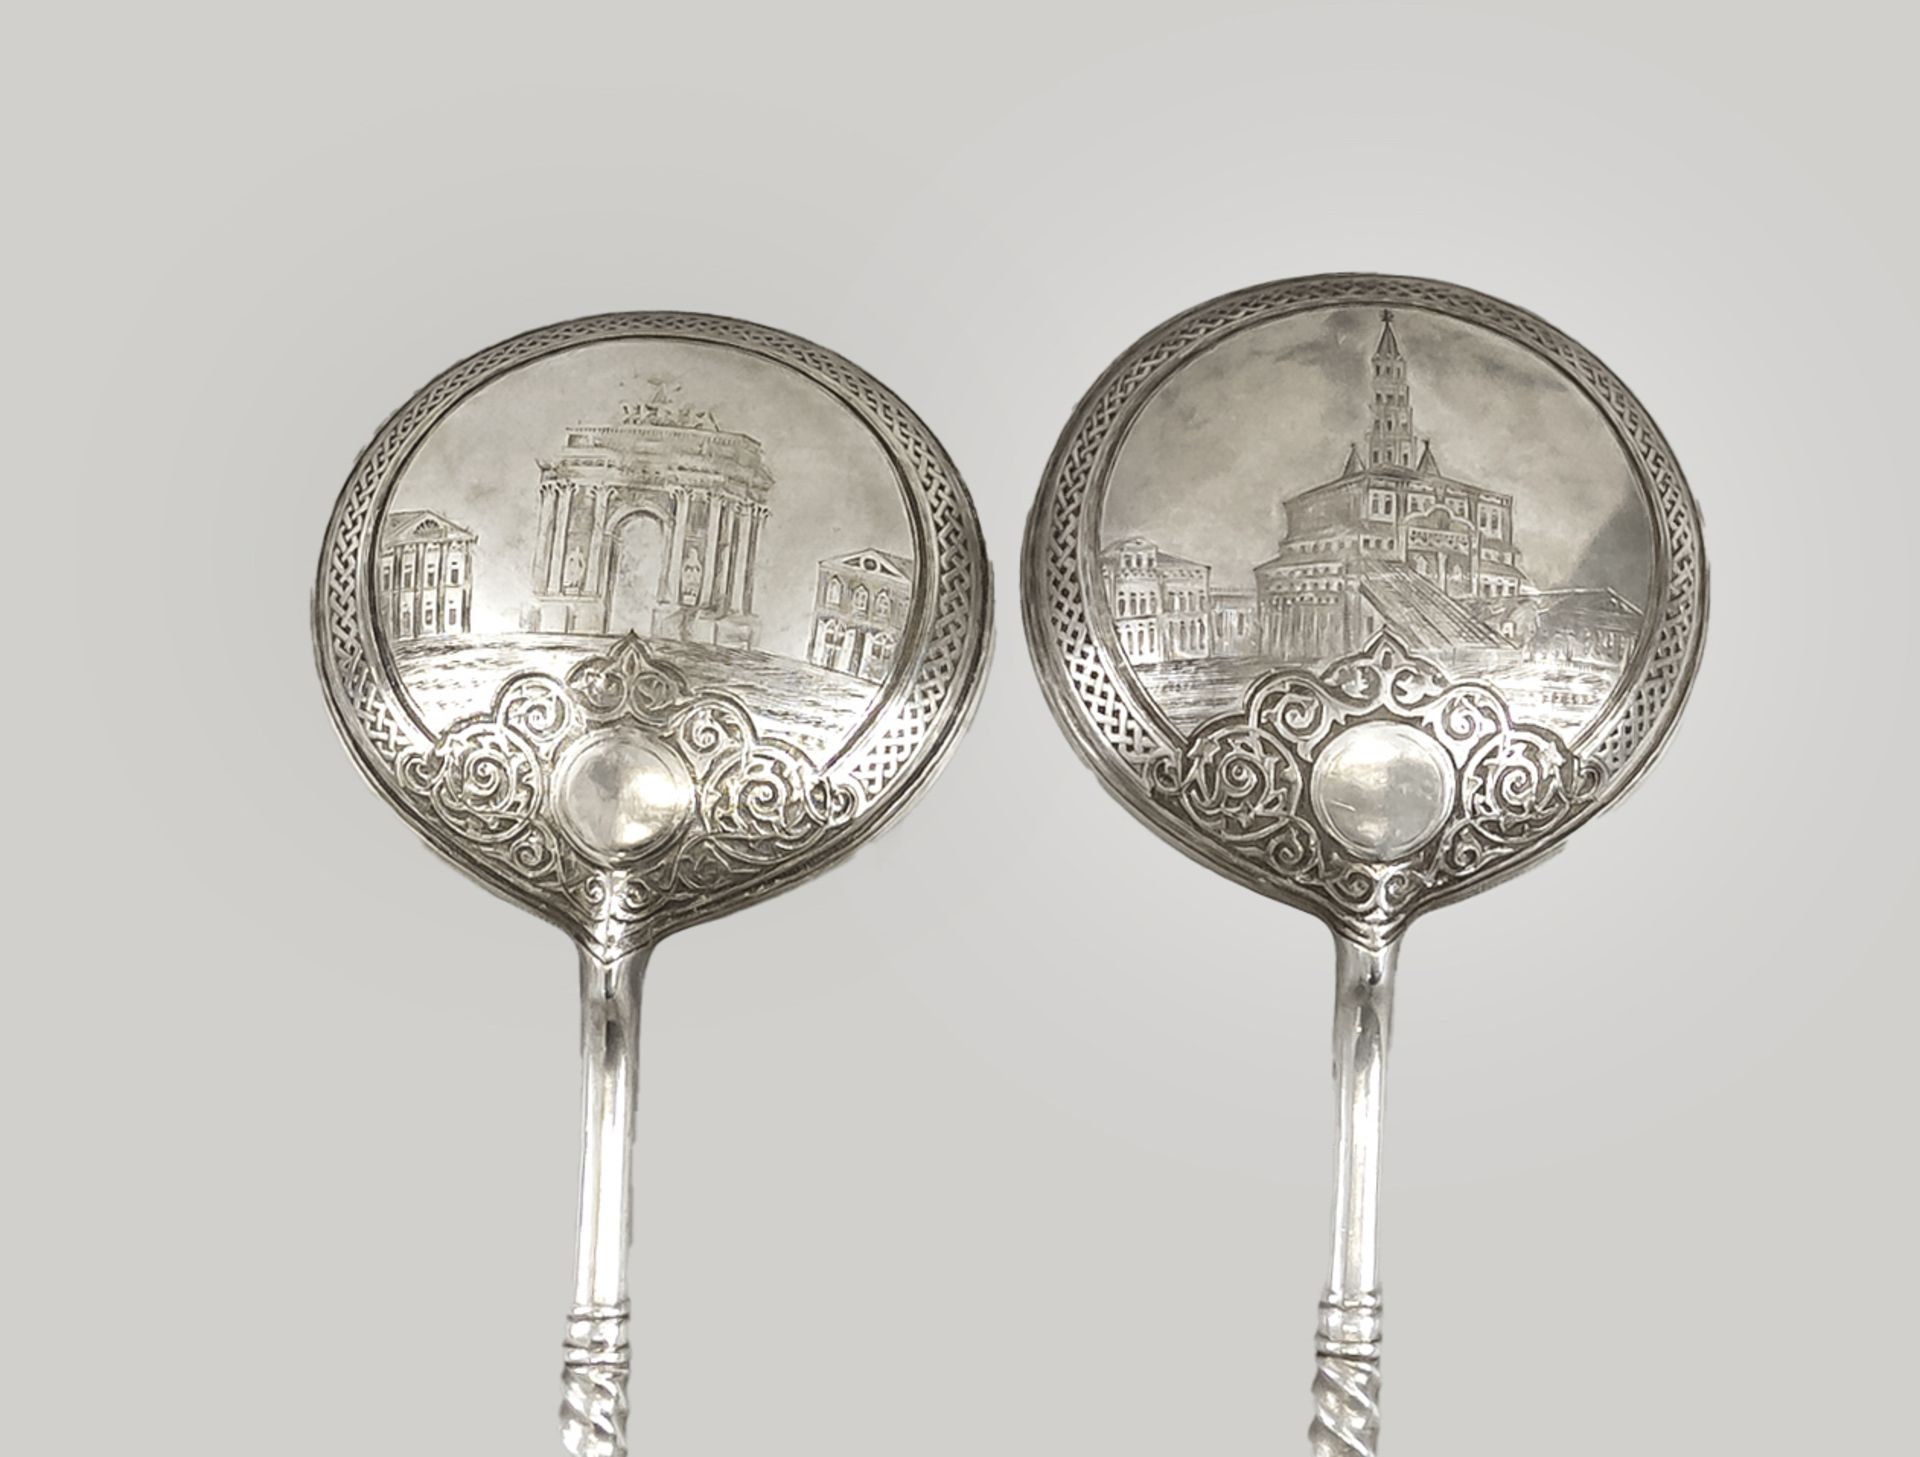 A pair of ornamental spoons, hallmarked Russia, 1877, Moscow city mark, struck hallmarks, Siber 84 - Image 2 of 3